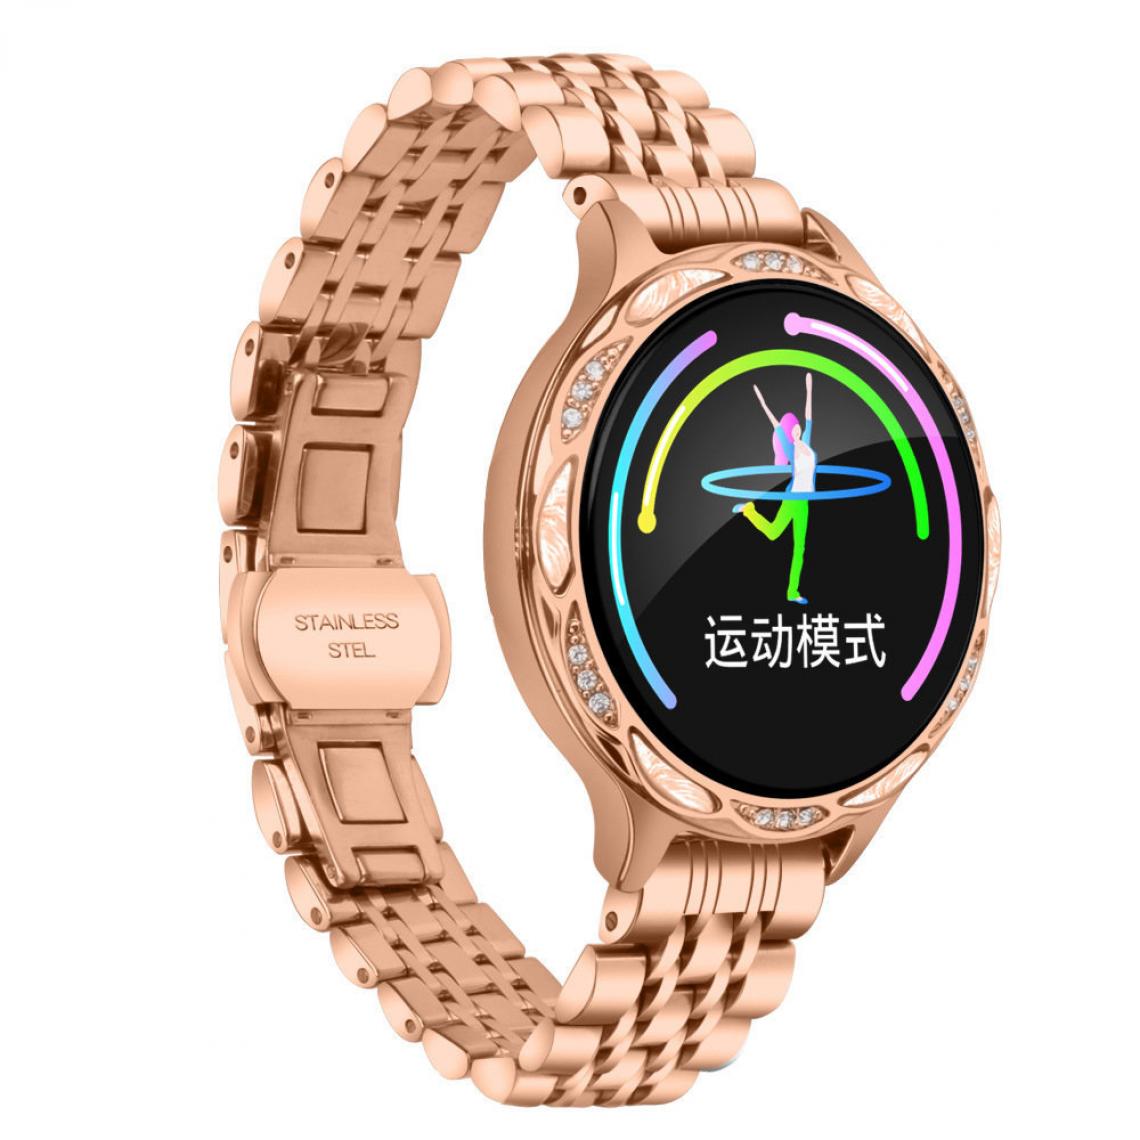 Chronotech Montres - Chronus Smart Watch, Fitness Watch Activity Tracker, IP68 Waterproof Touch Screen Sports Watch, Suitable For Men And Women(gold) - Montre connectée